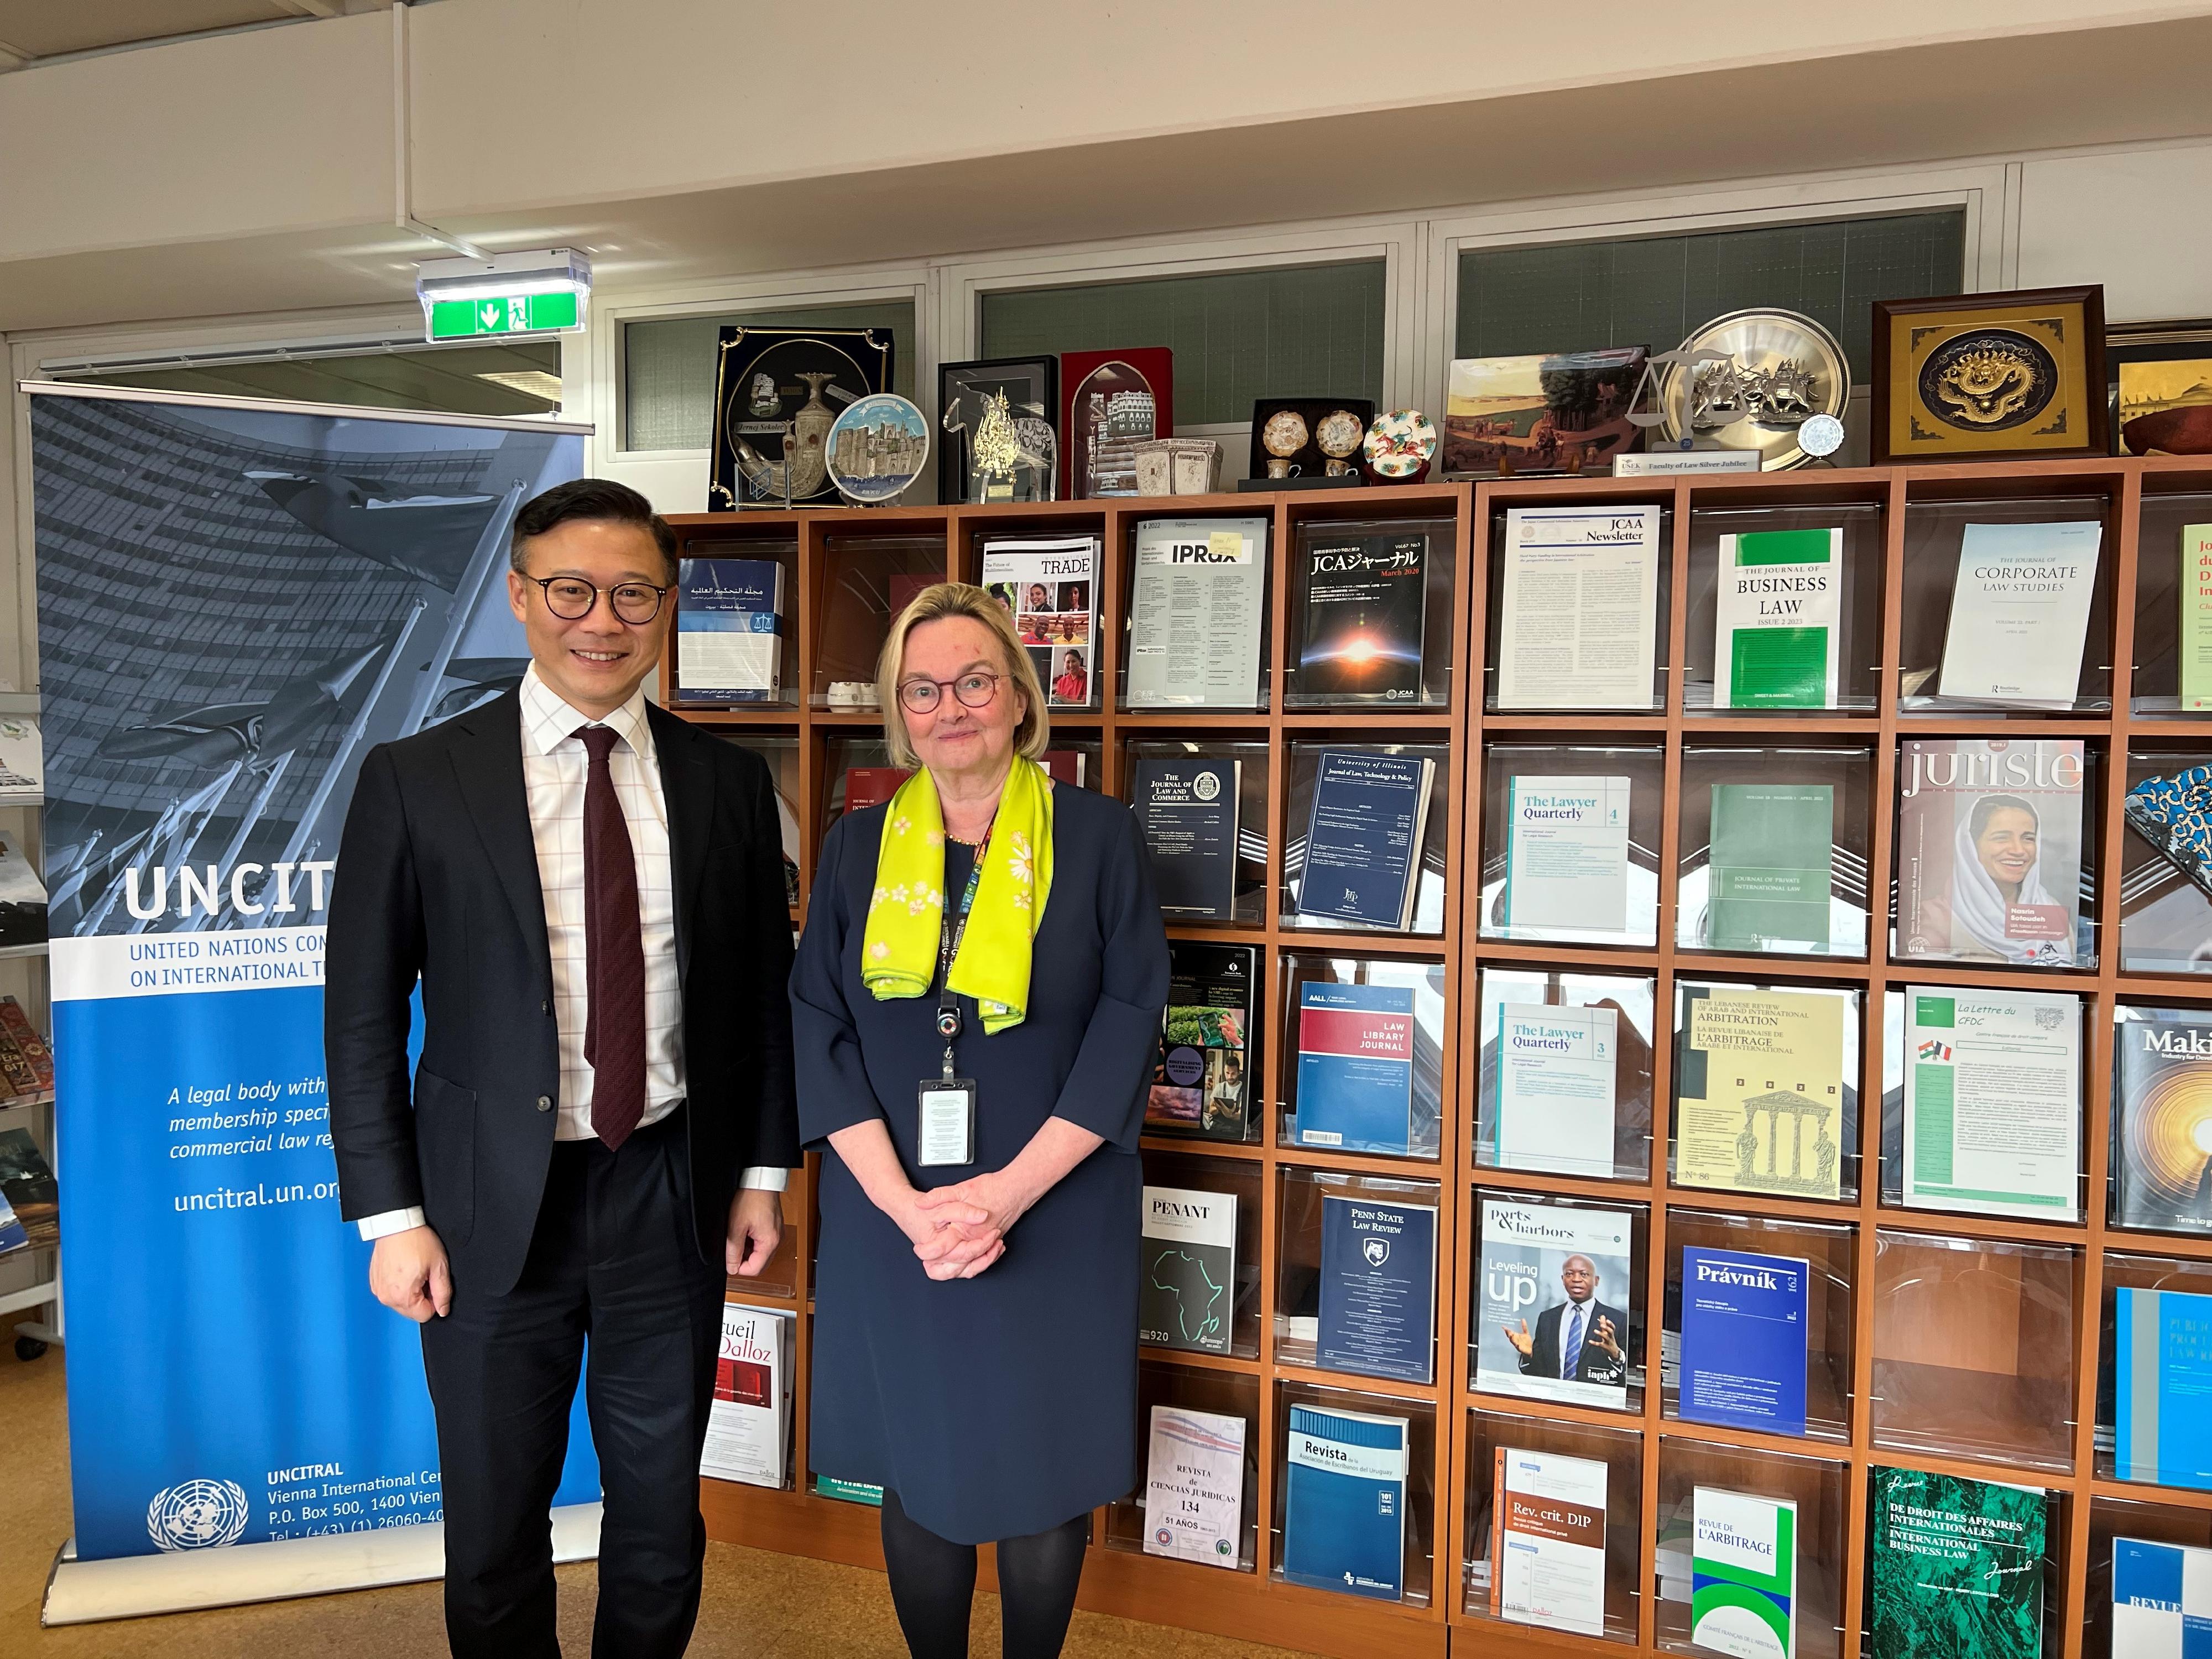 The Deputy Secretary for Justice, Mr Cheung Kwok-kwan (left), met with the Secretary of the United Nations Commission on International Trade Law, Ms Anna Joubin-Bret (right), in Vienna, Austria, on March 7 (Vienna time).
